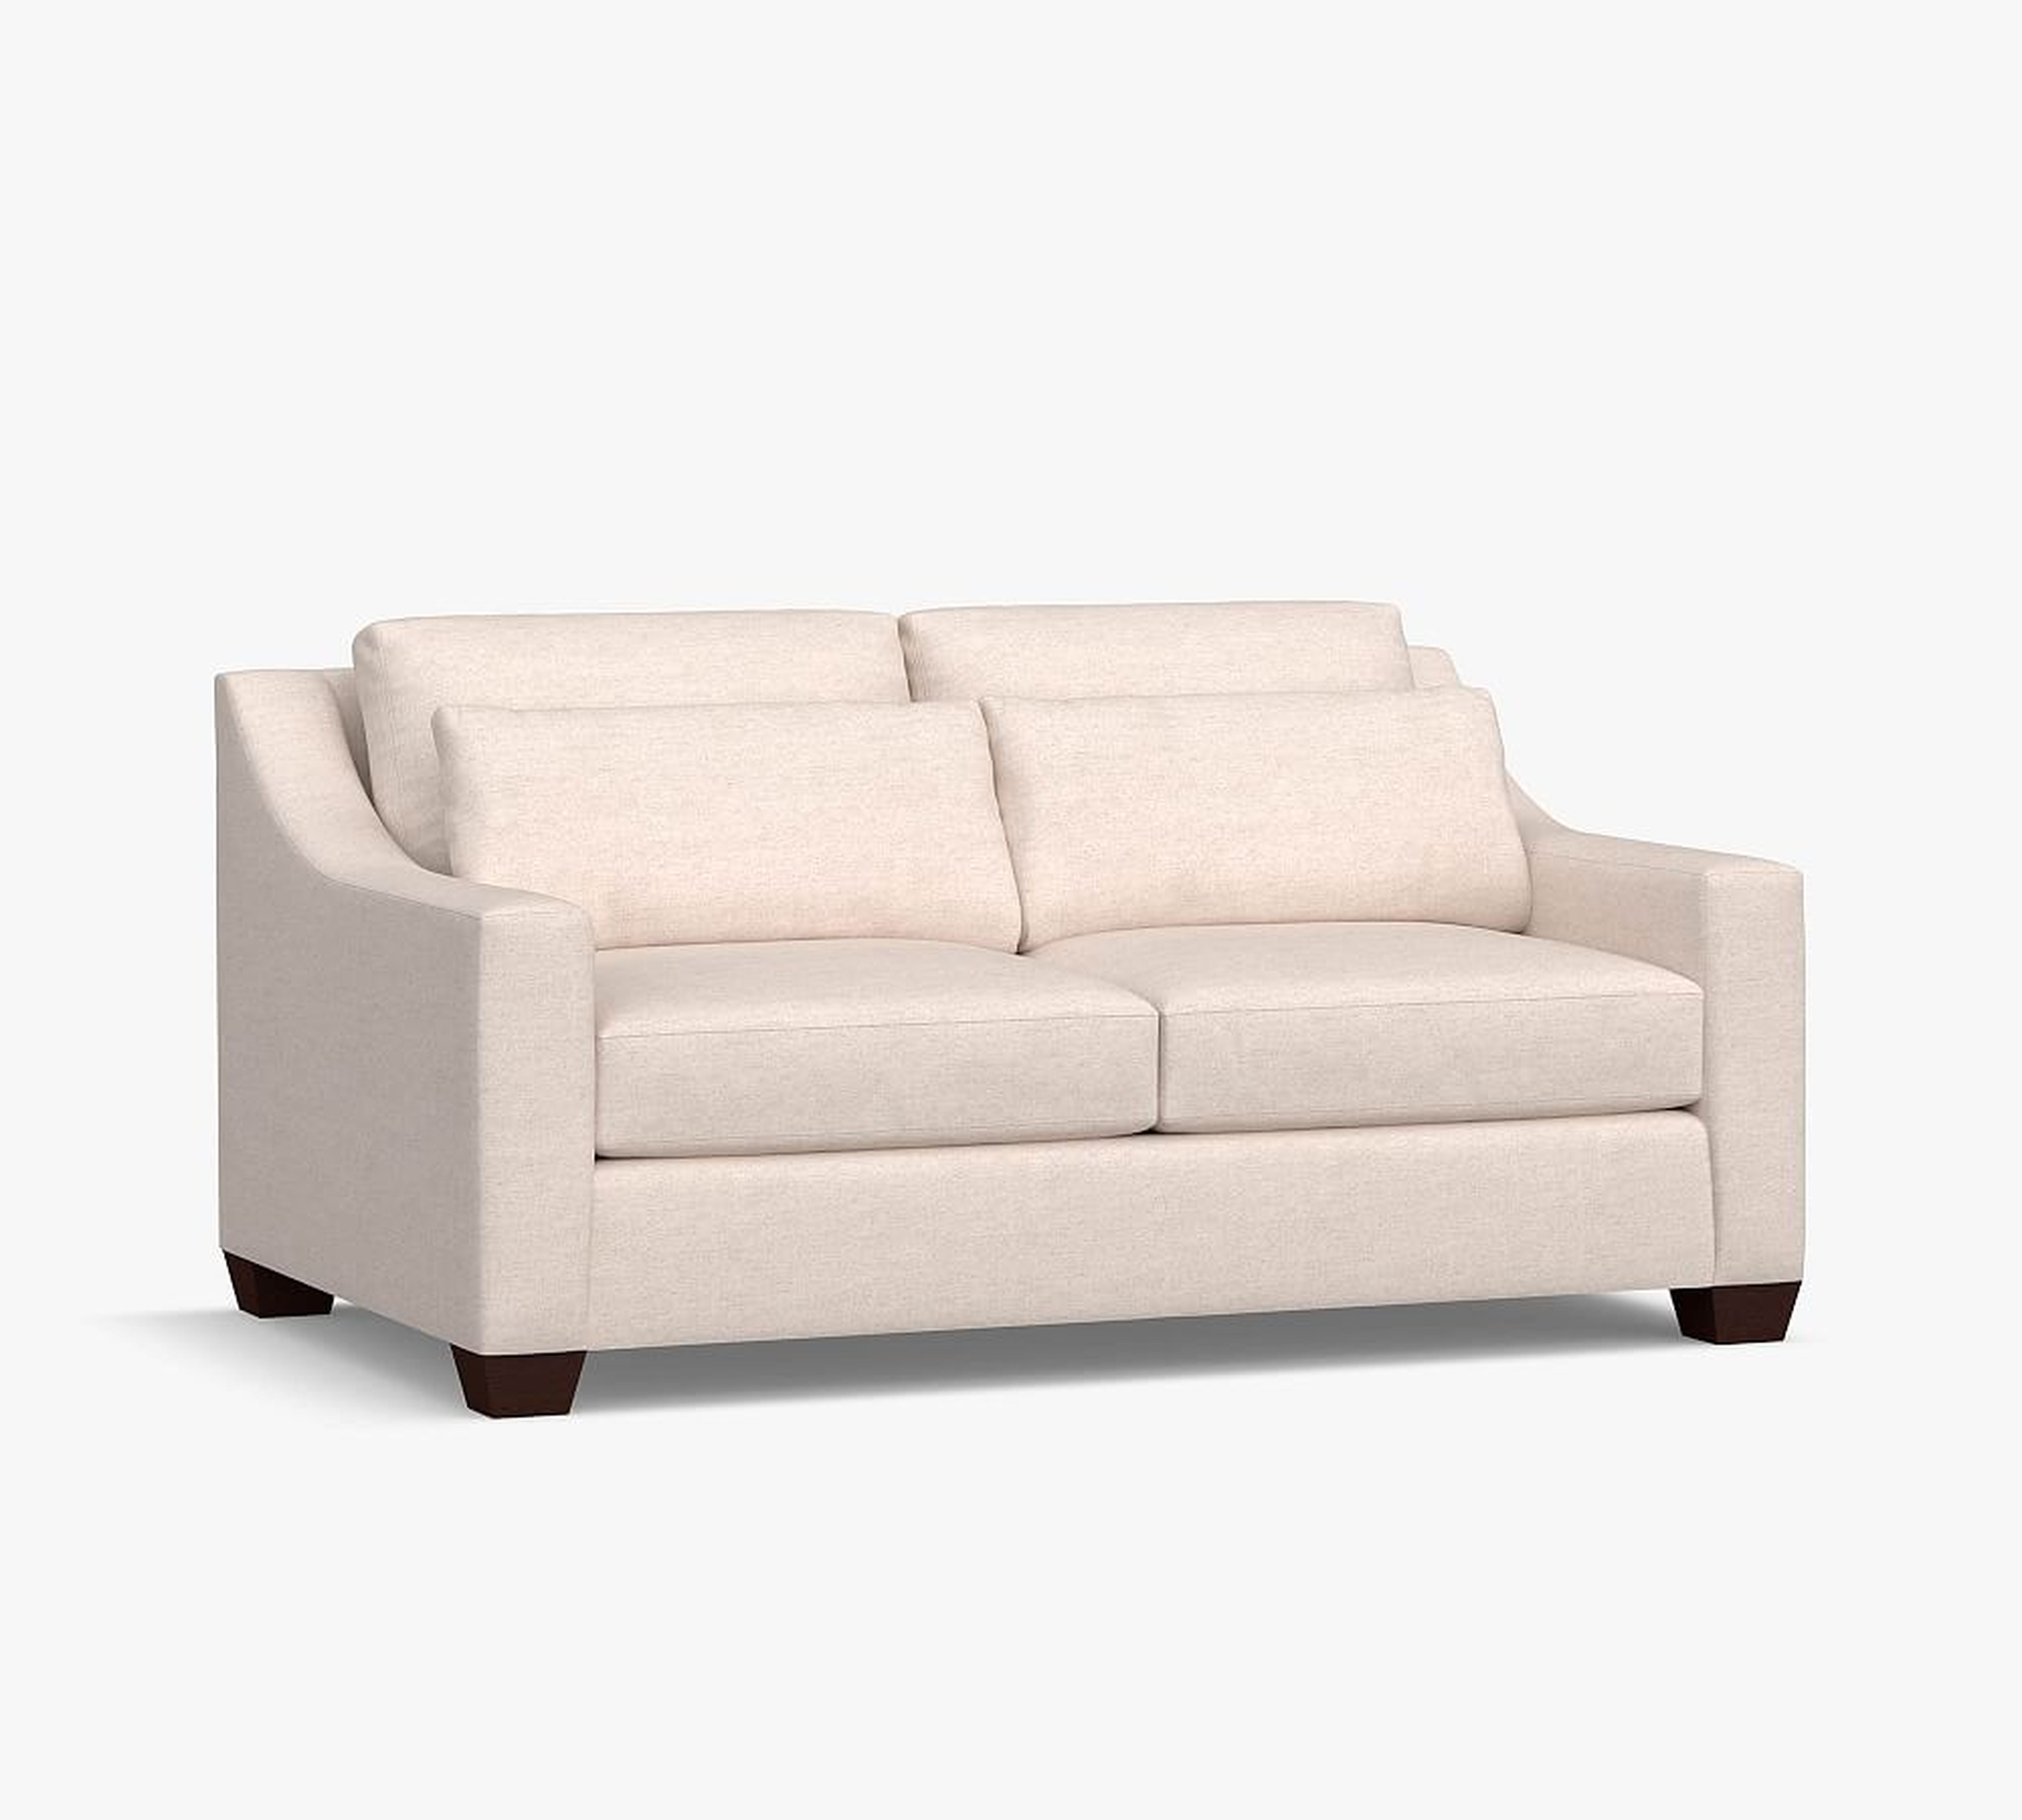 York Slope Arm Upholstered Deep Seat Loveseat 72", Down Blend Wrapped Cushions, Performance Everydaylinen(TM) Oatmeal - Pottery Barn